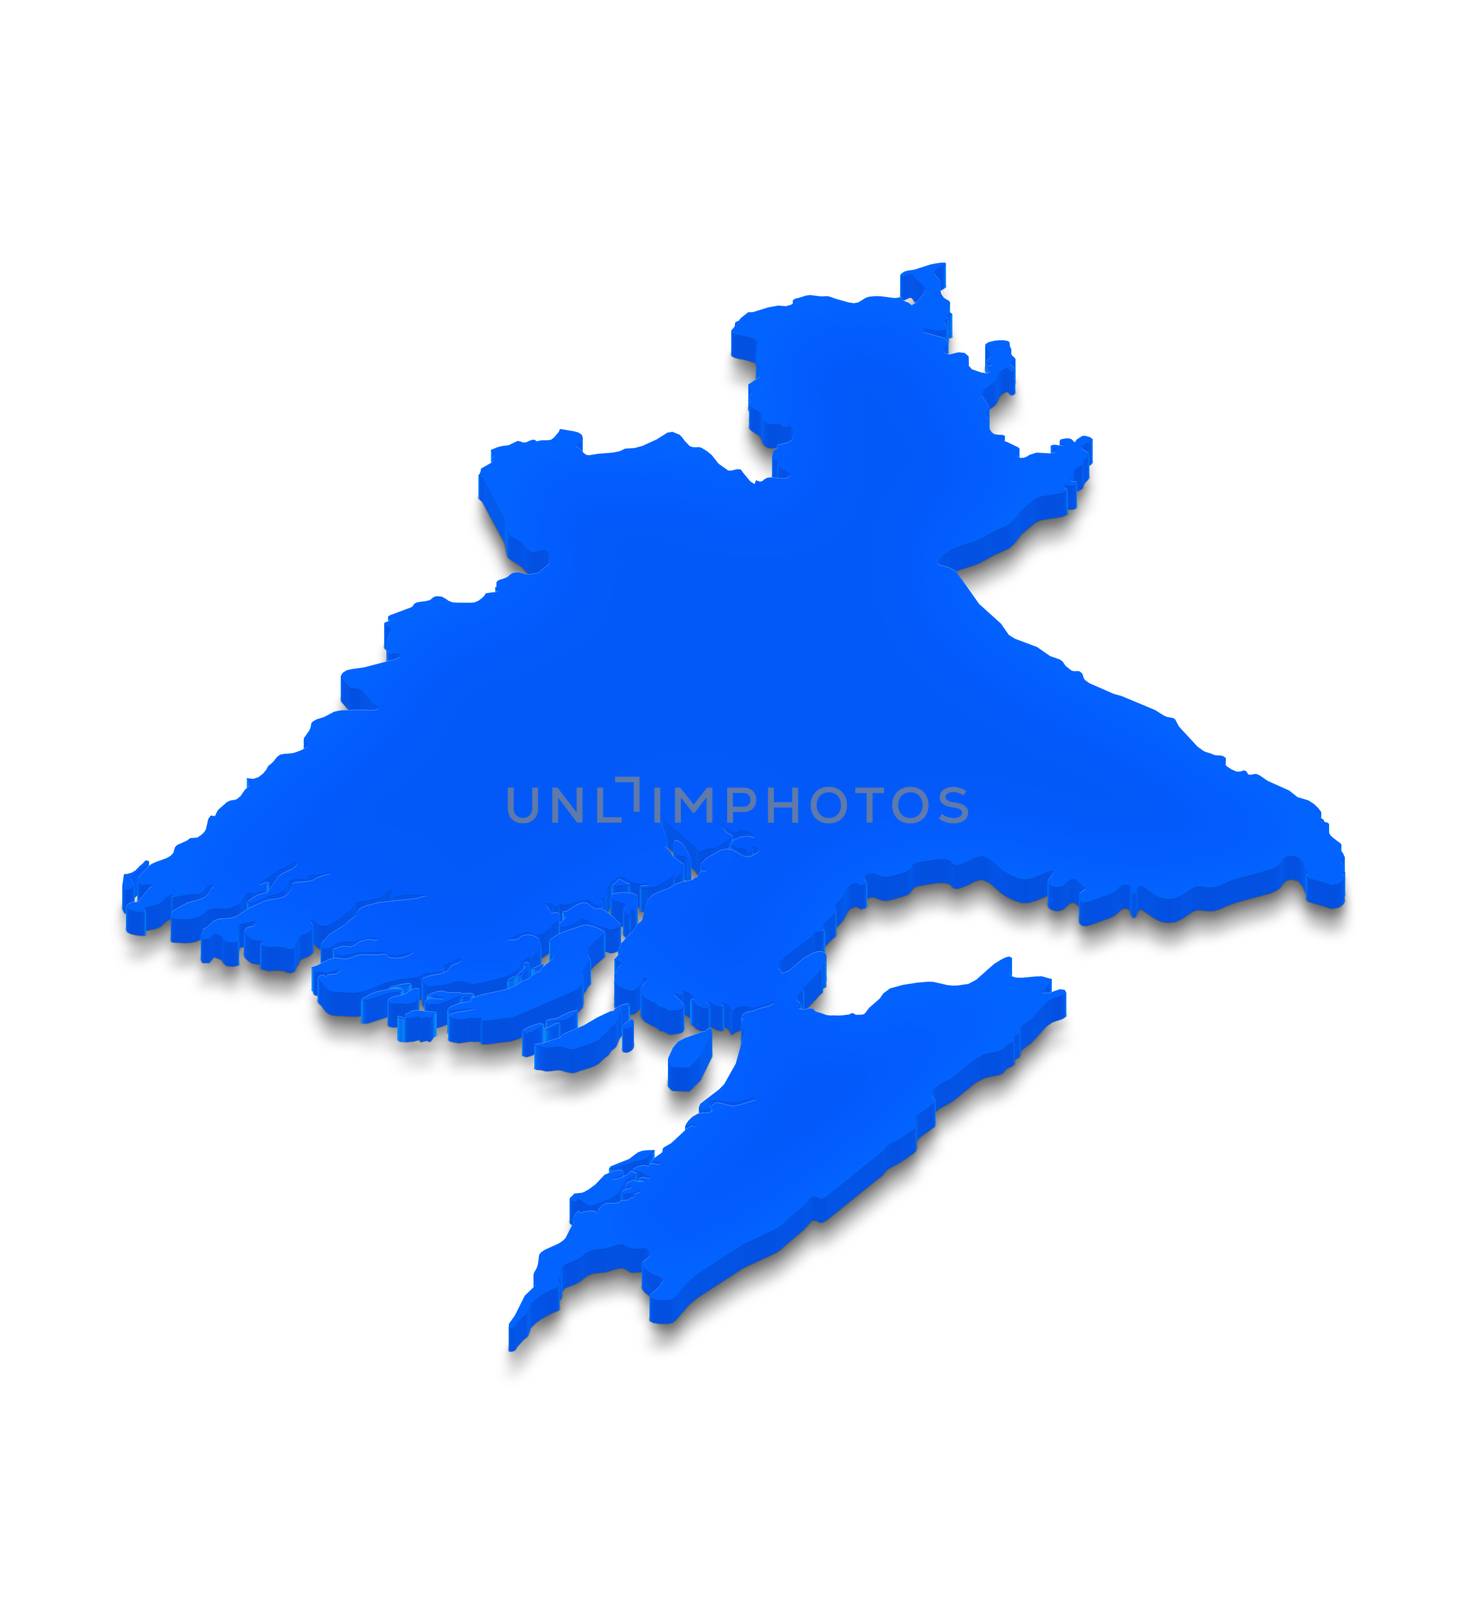 Illustration of a blue ground map of Bangladesh on white isolated background. Left 3D isometric perspective projection.